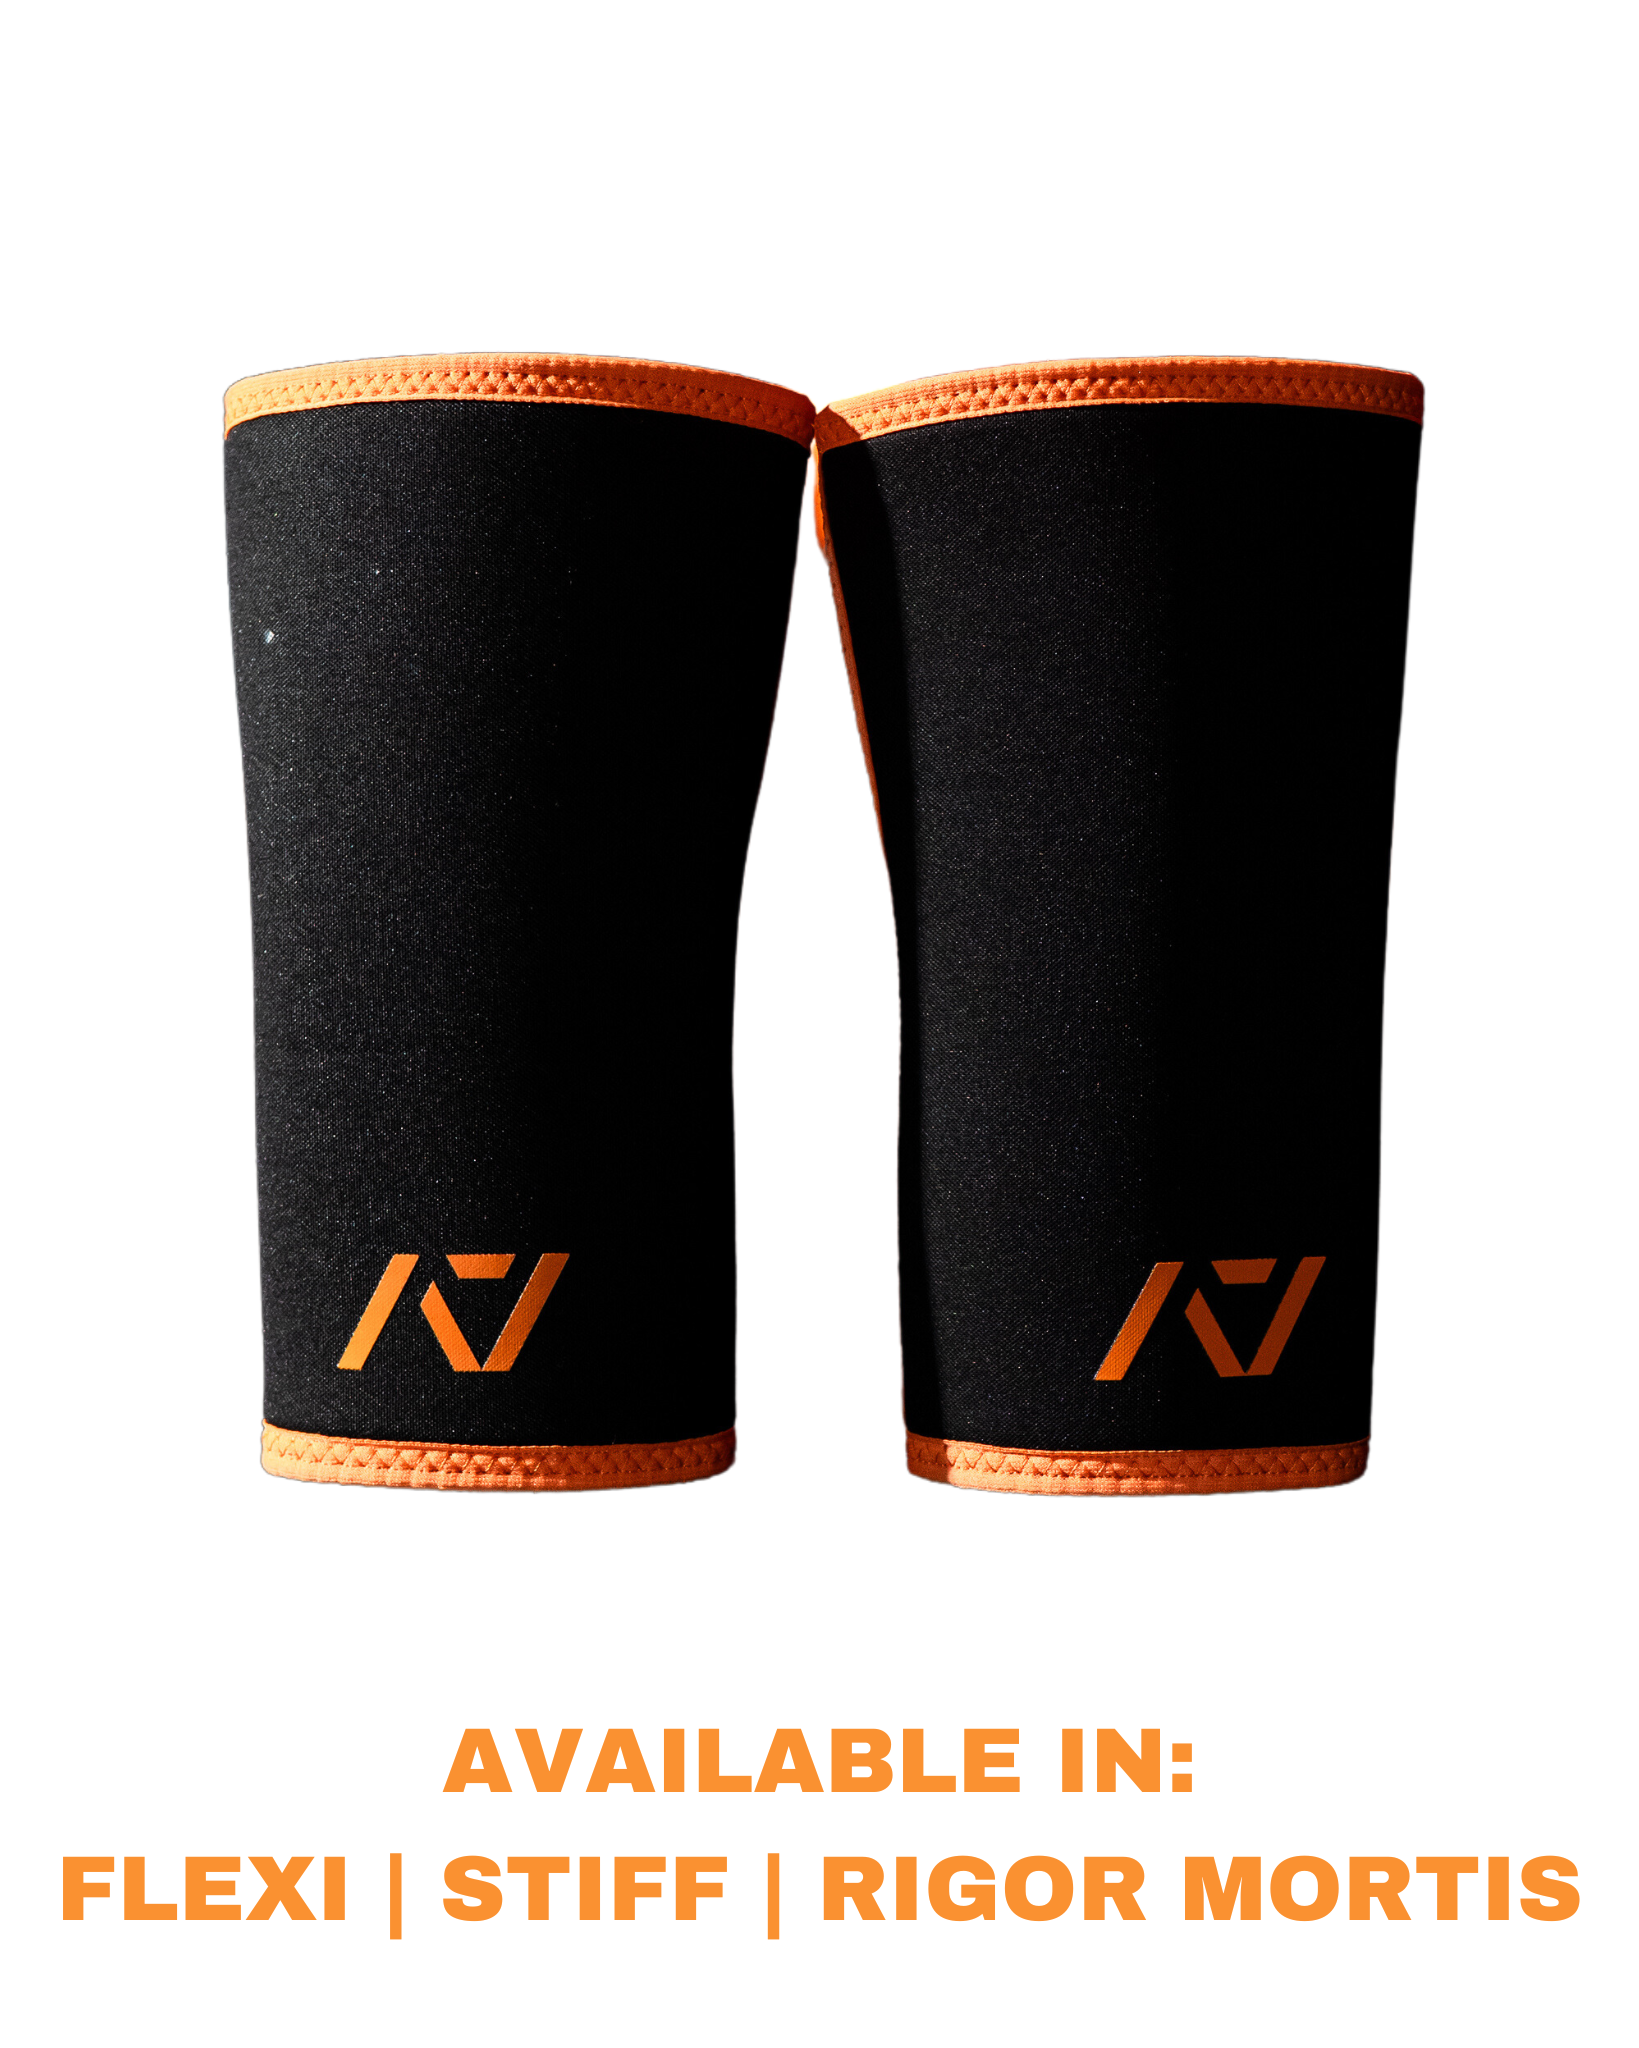 A7 IPF Approved Hourglass Knee Sleeves feature an hourglass-shaped centre taper fit to help provide knee compression while maintaining proper tightness around the calf and quad, offered in three stiffnesses (Flexi, Stiff and Rigor Mortis). Shop the full A7 Powerlifting IPF Approved Equipment collection. The IPF Approved Kit includes Powerlifting Singlet, A7 Meet Shirt, A7 Zebra Wrist Wraps and A7 Deadlift Socks. Genouillères powerlifting shipping to France, Spain, Ireland, Germany, Italy, Sweden and EU. 